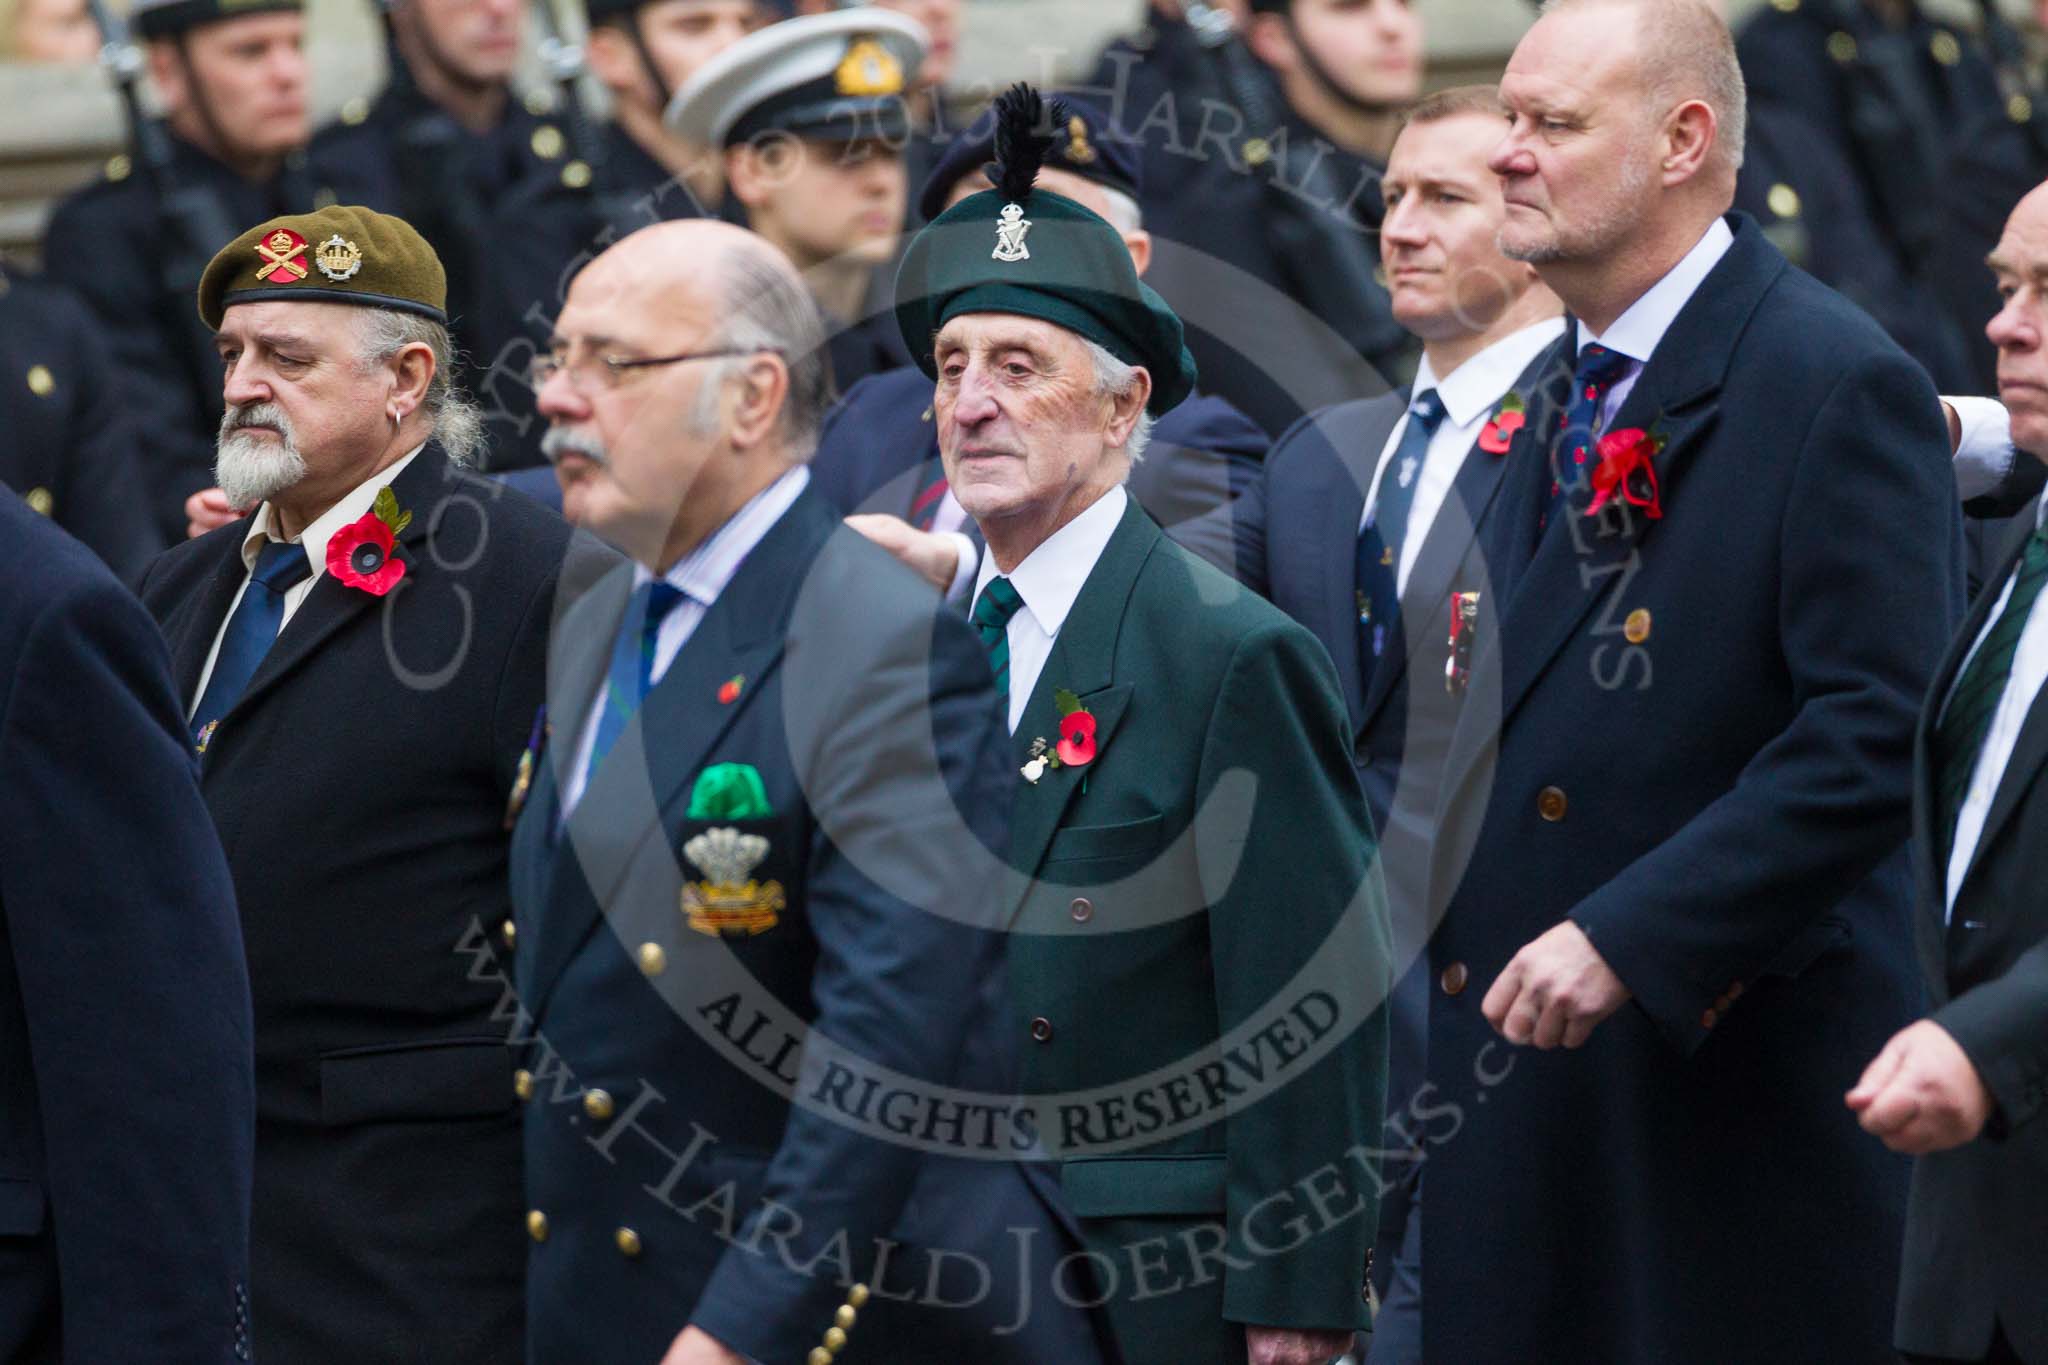 Remembrance Sunday at the Cenotaph 2015: Group D5, North Irish Horse & Irish Regiments Old Comrades
Association.
Cenotaph, Whitehall, London SW1,
London,
Greater London,
United Kingdom,
on 08 November 2015 at 11:52, image #616